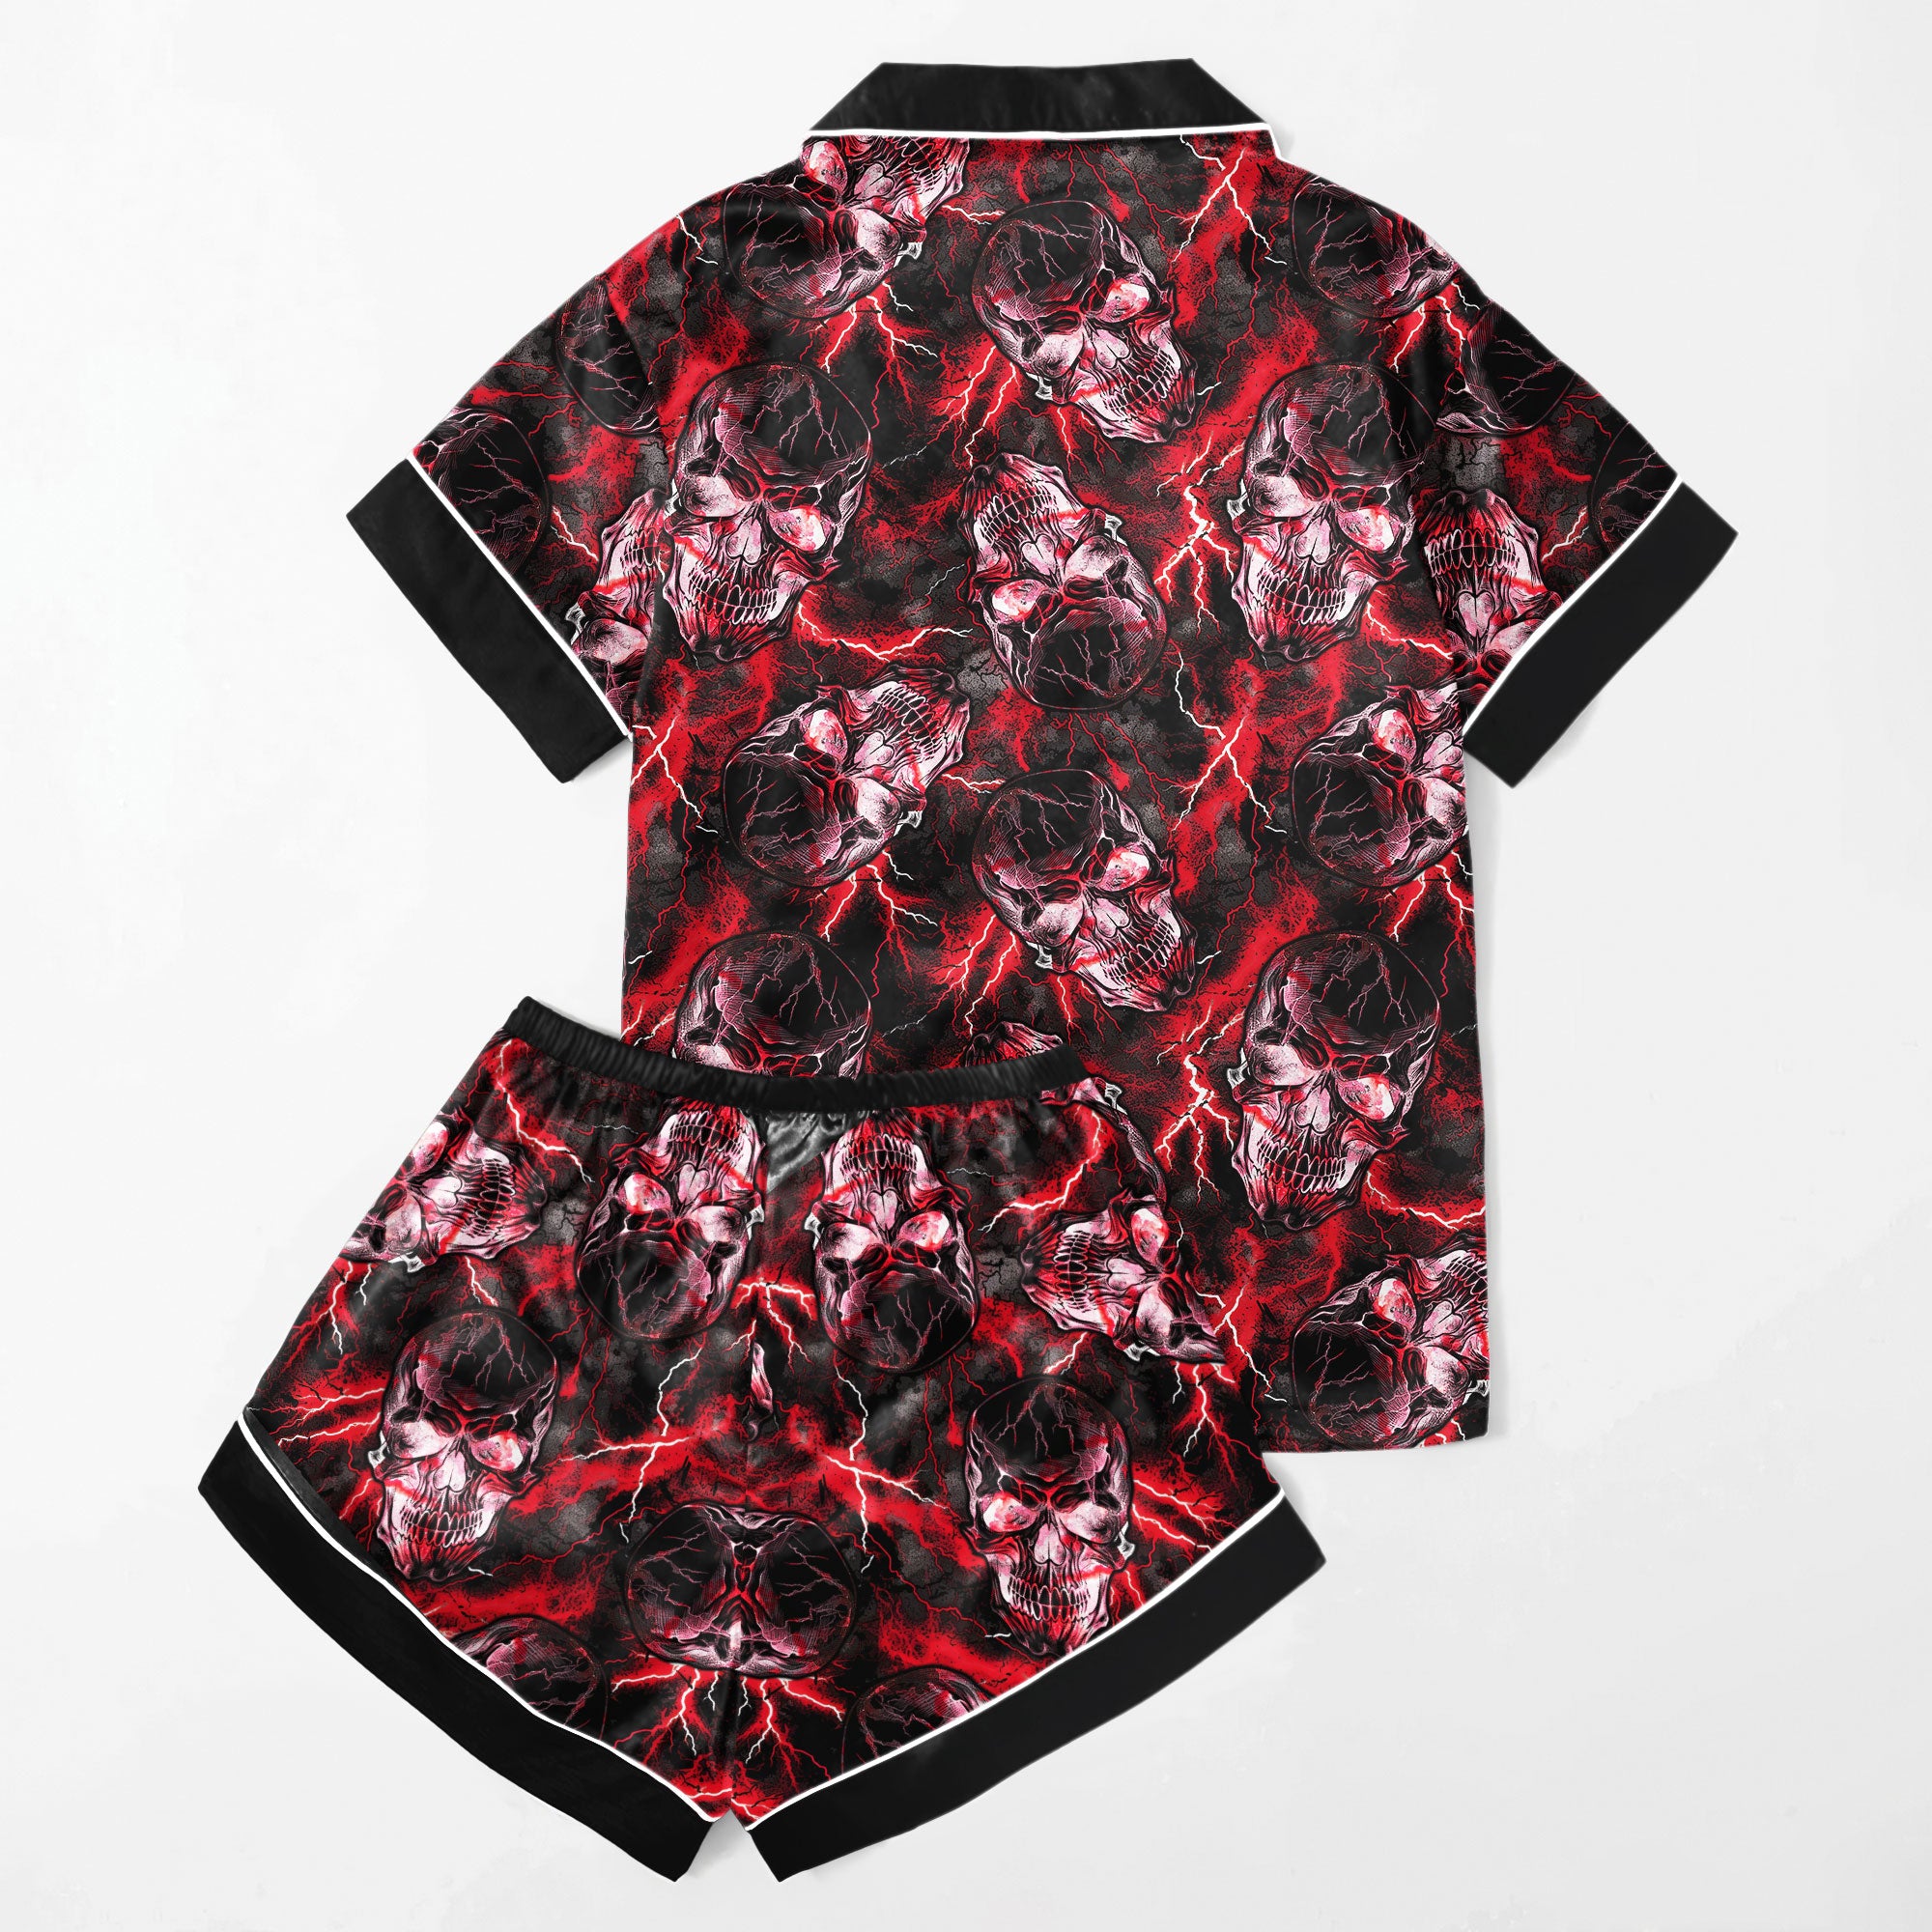 Chic and stylish women's pajama set with unique design prints and statement sleeves, Soft and luxurious fabrics make this pajama set perfect for bedtime or lounging at home.